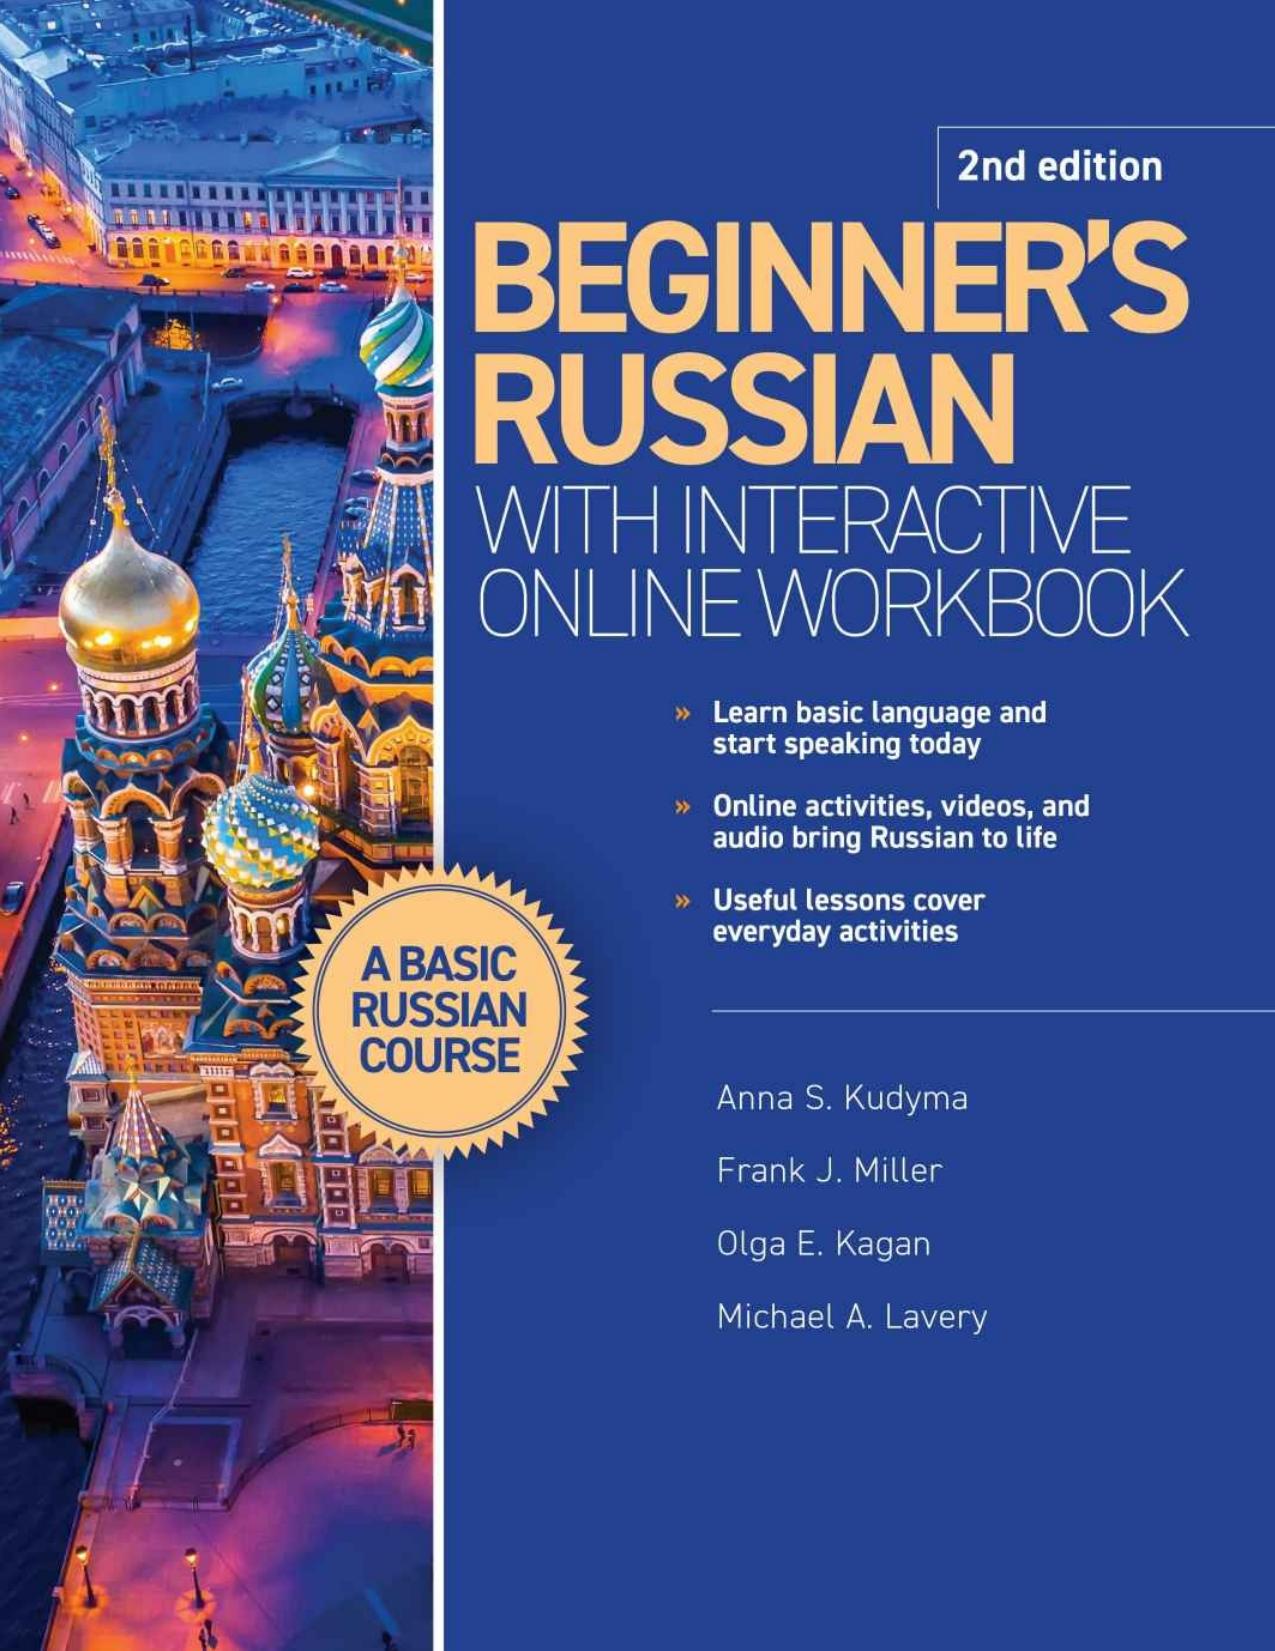 Beginner's Russian with Interactive Online Workbook by Anna S. Kudyma Frank J. Miller Olga E. Kagan Michael A. Lavery